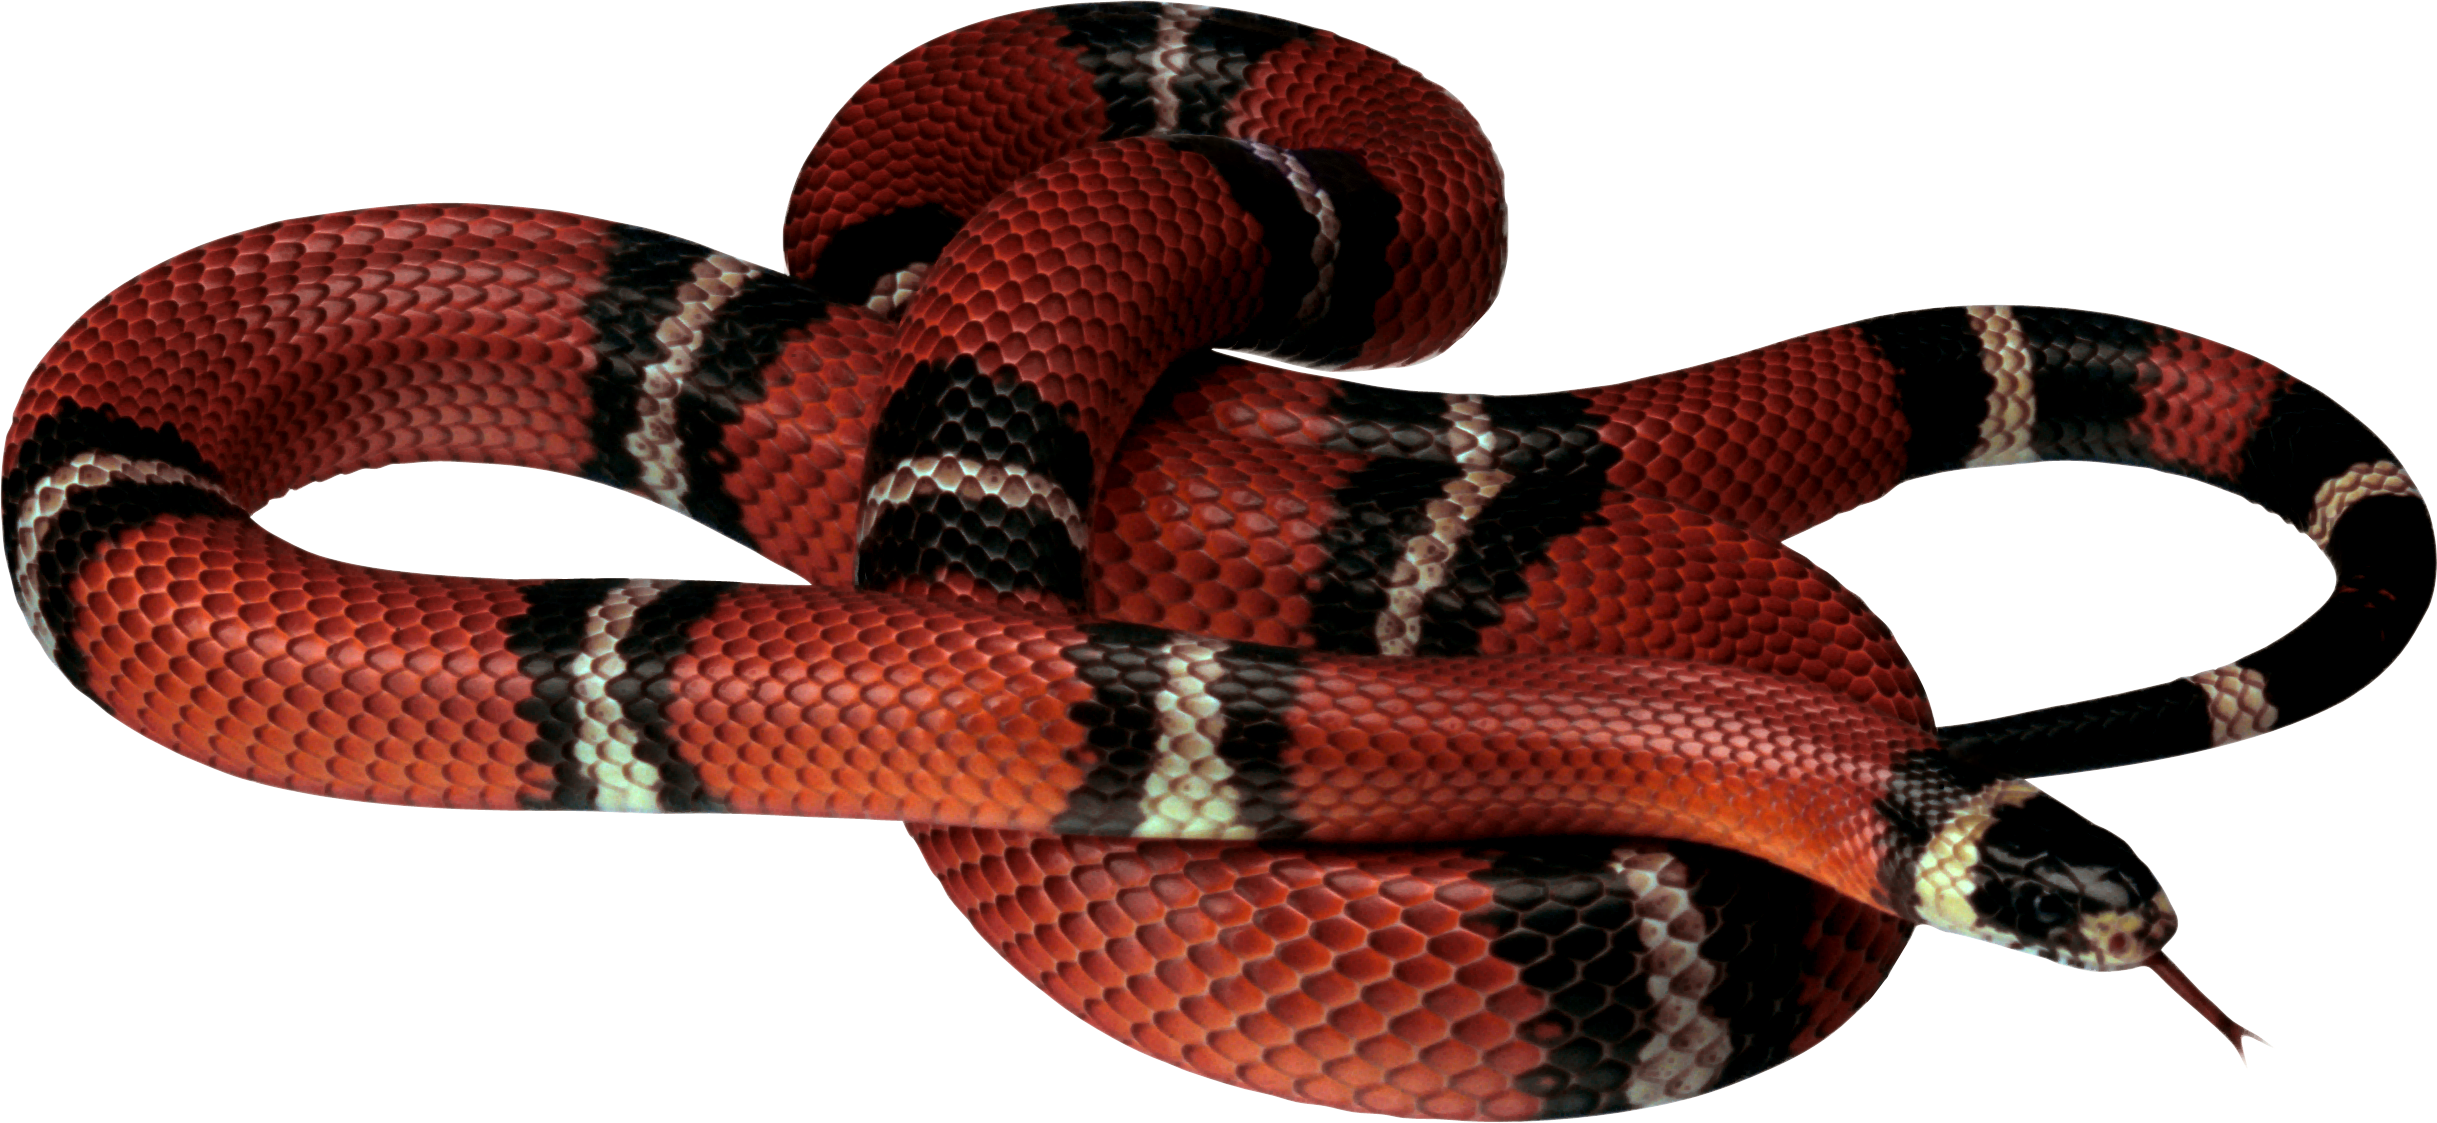 A Red And Black Snake